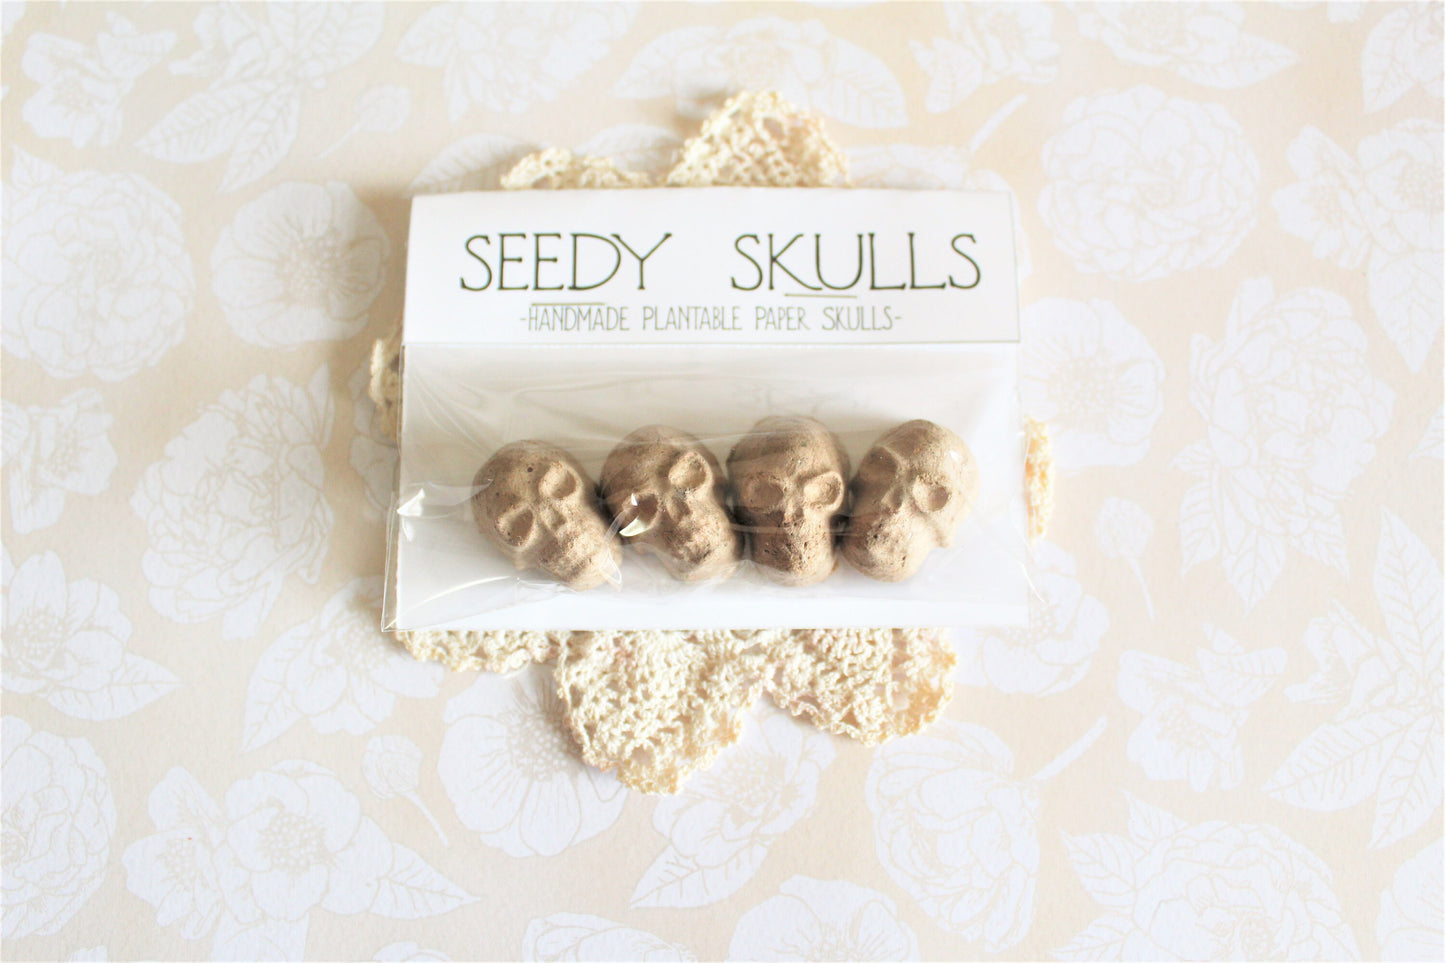 Brown Plantable Paper Skulls / Skull Seed Bombs / Seedy Skulls / Recycled Paper Pulp Craft / Spring Summer Small Gift / Wild Flowers